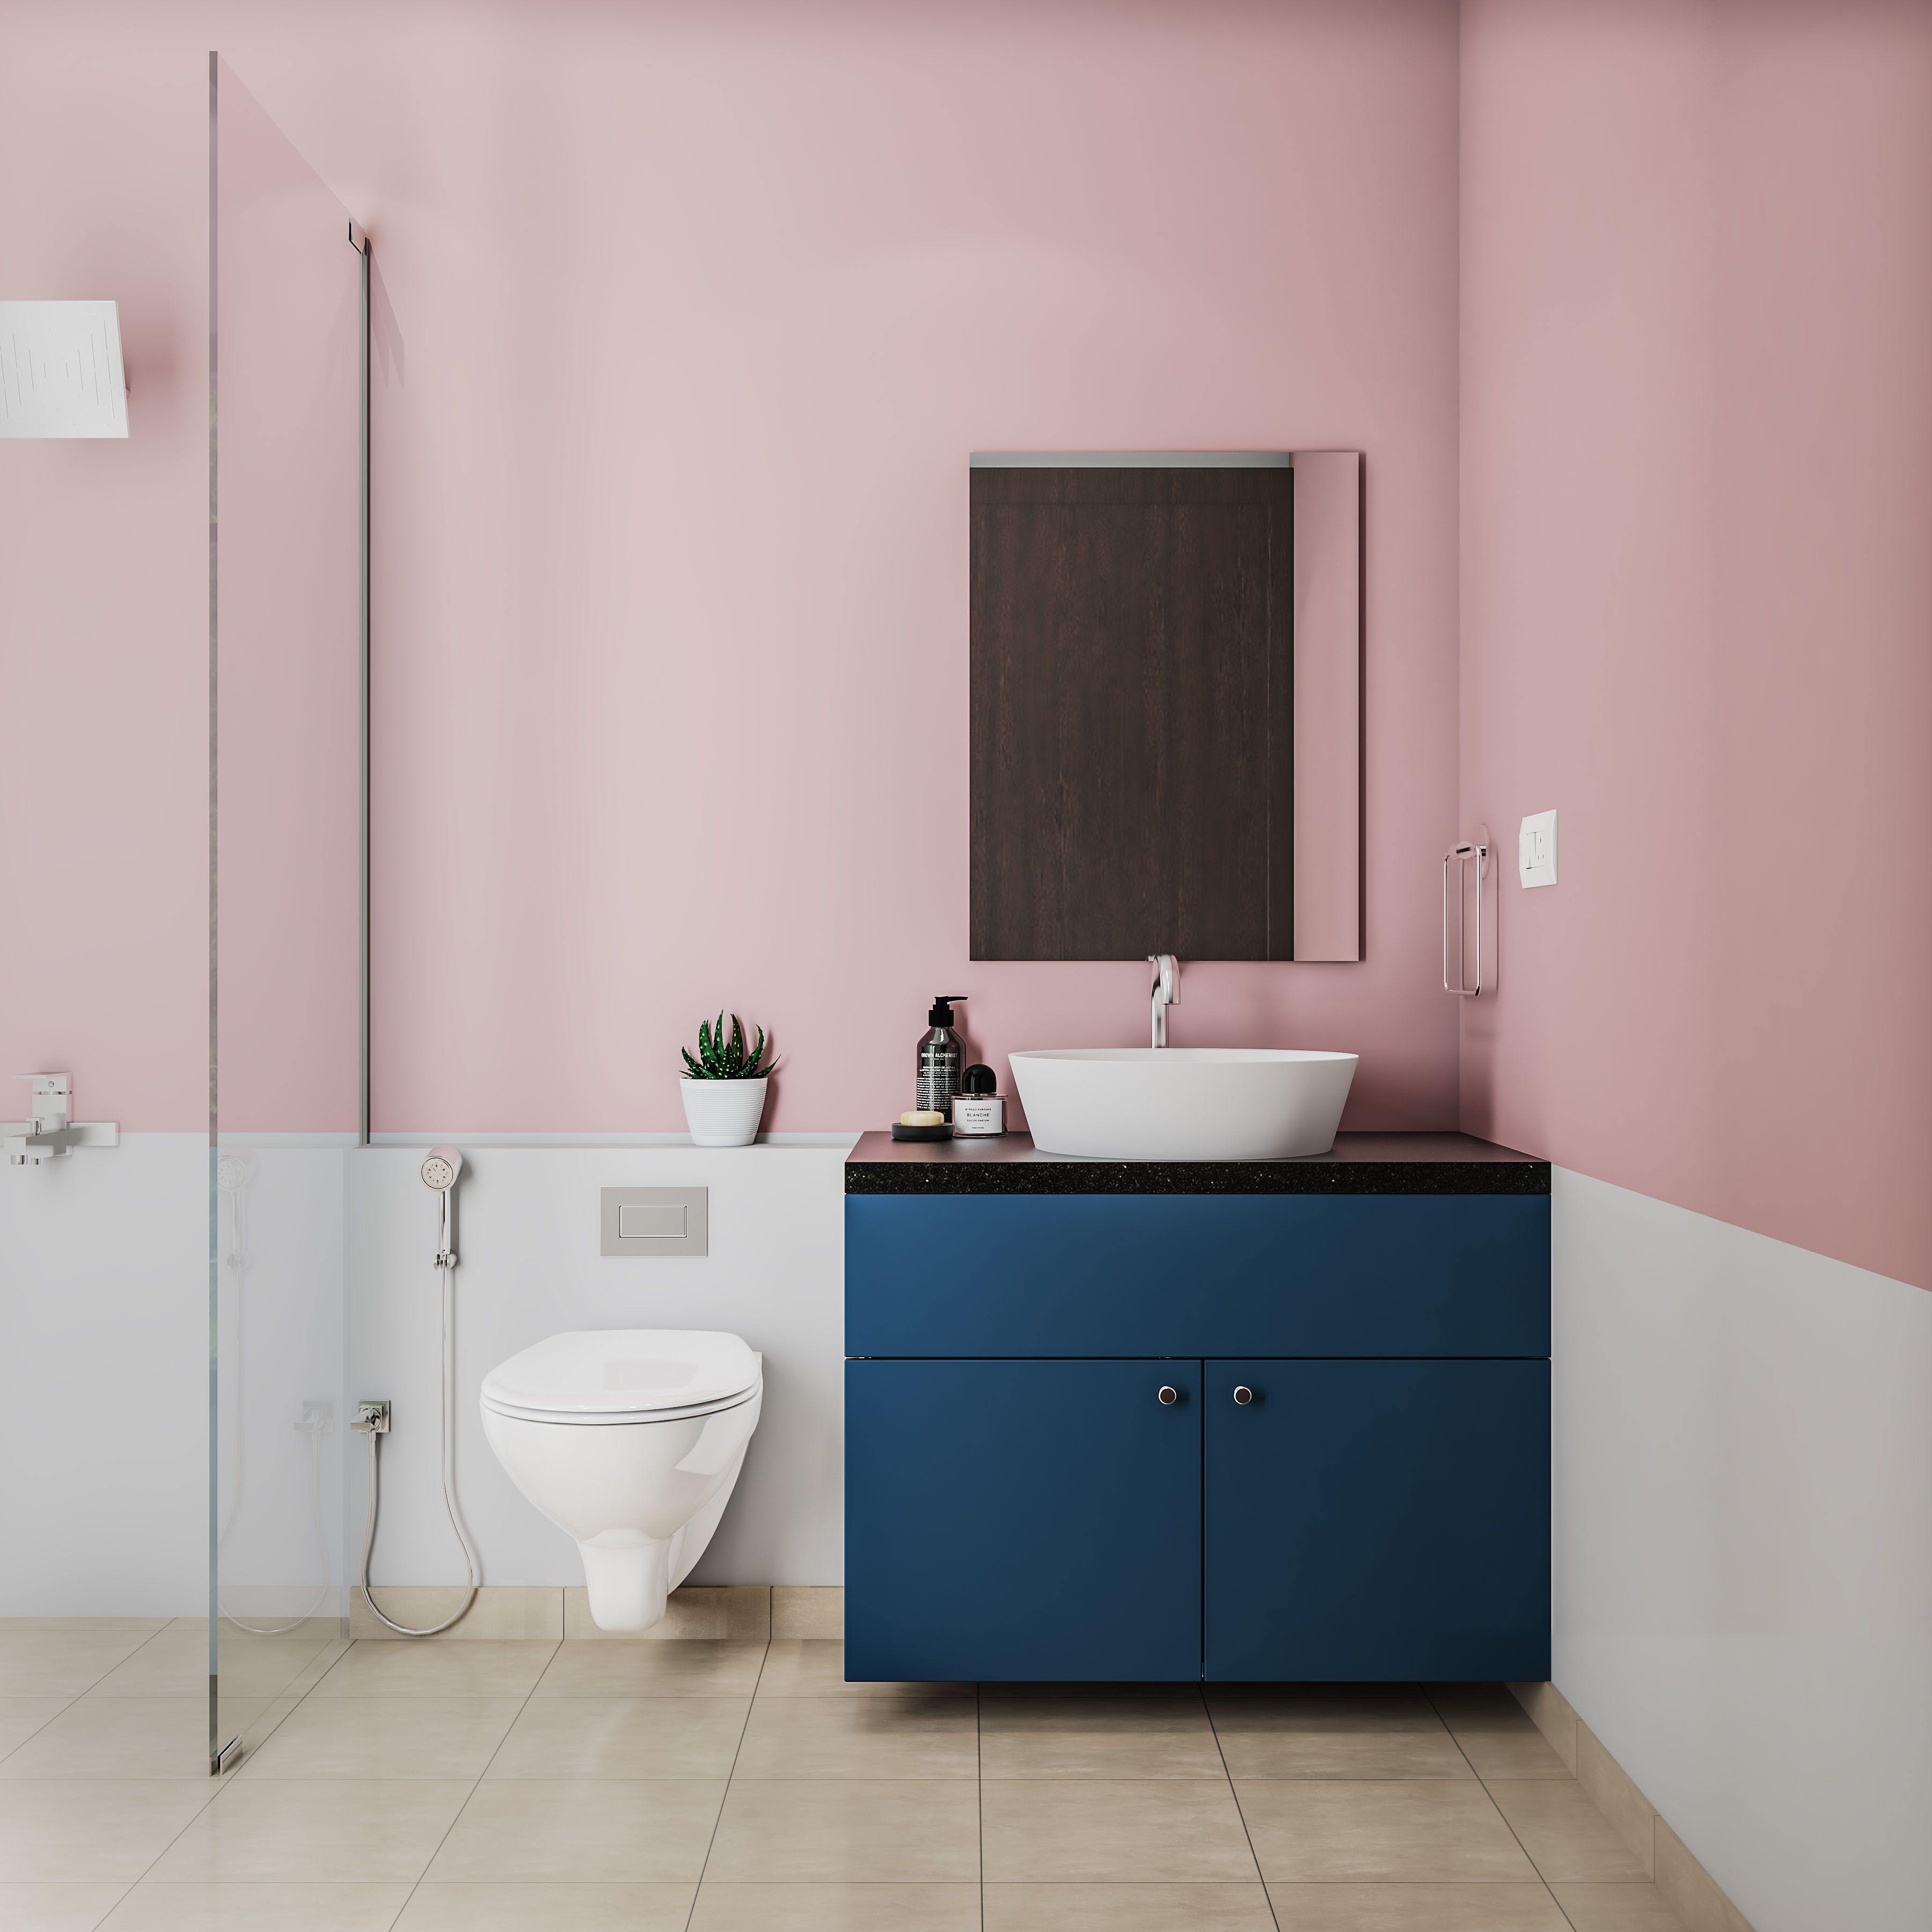 Contemporary Pink And White Bathroom Wall Paint Design